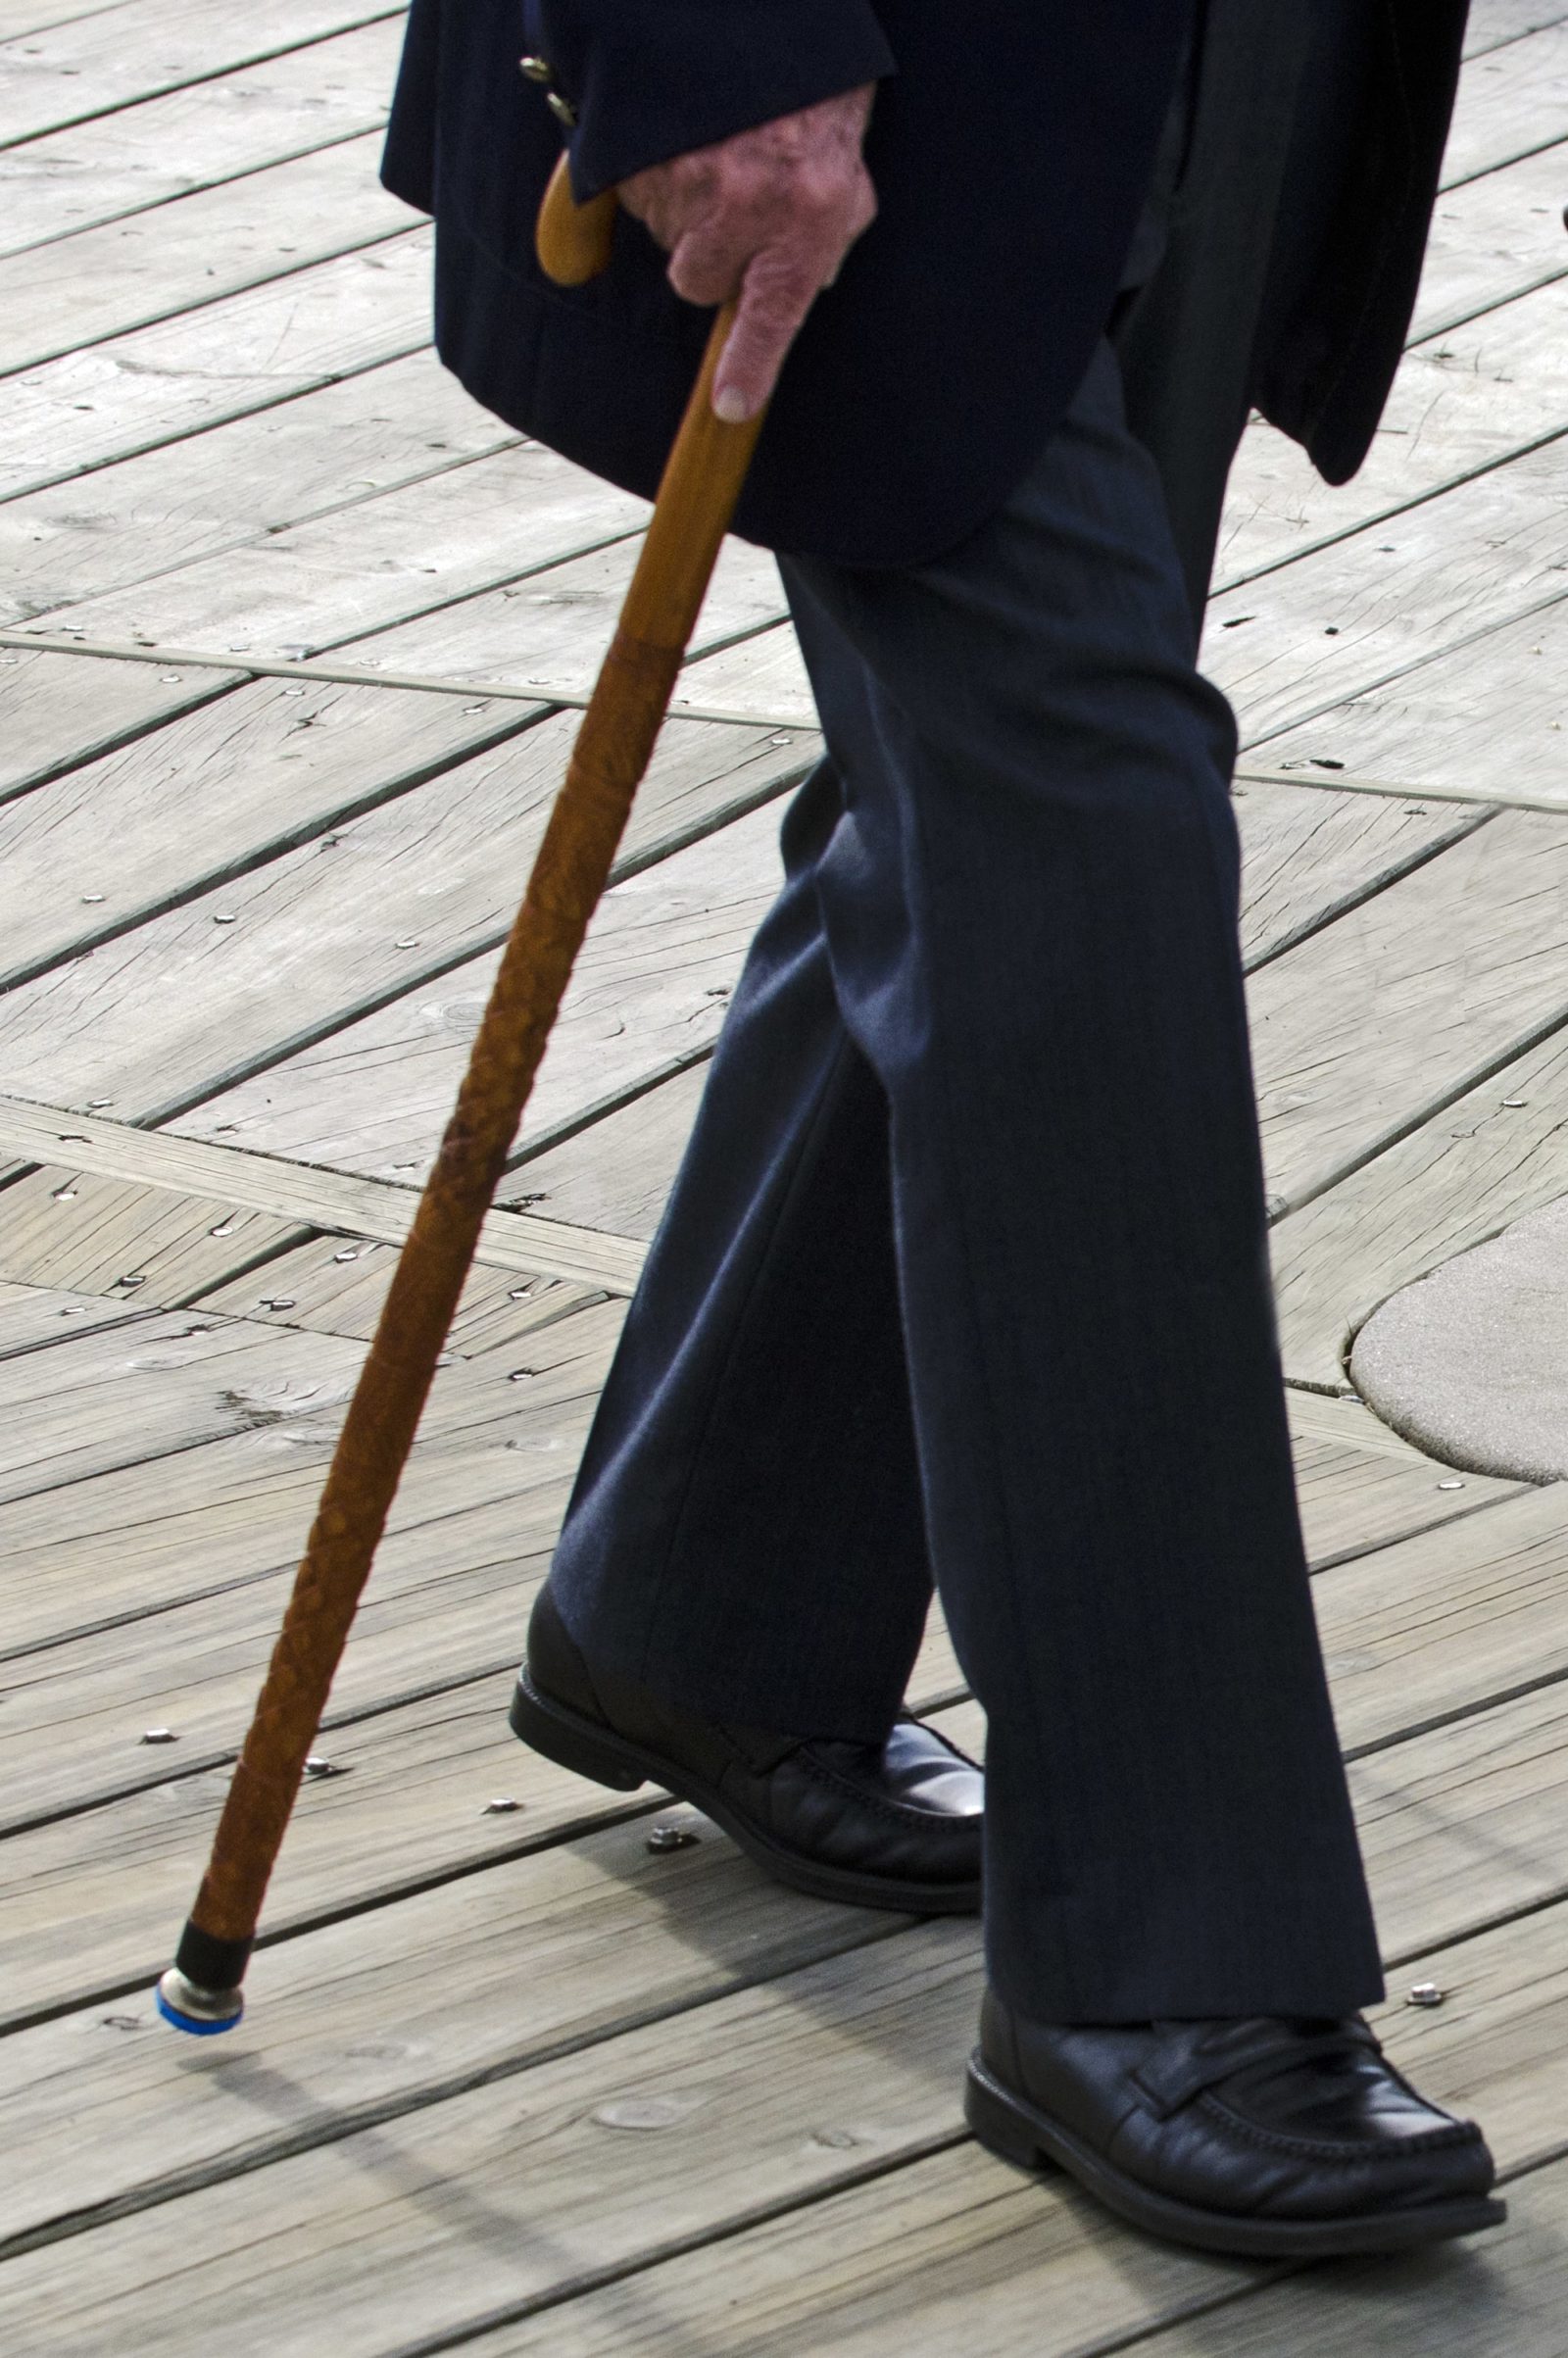 closeup of older man walking with a cane